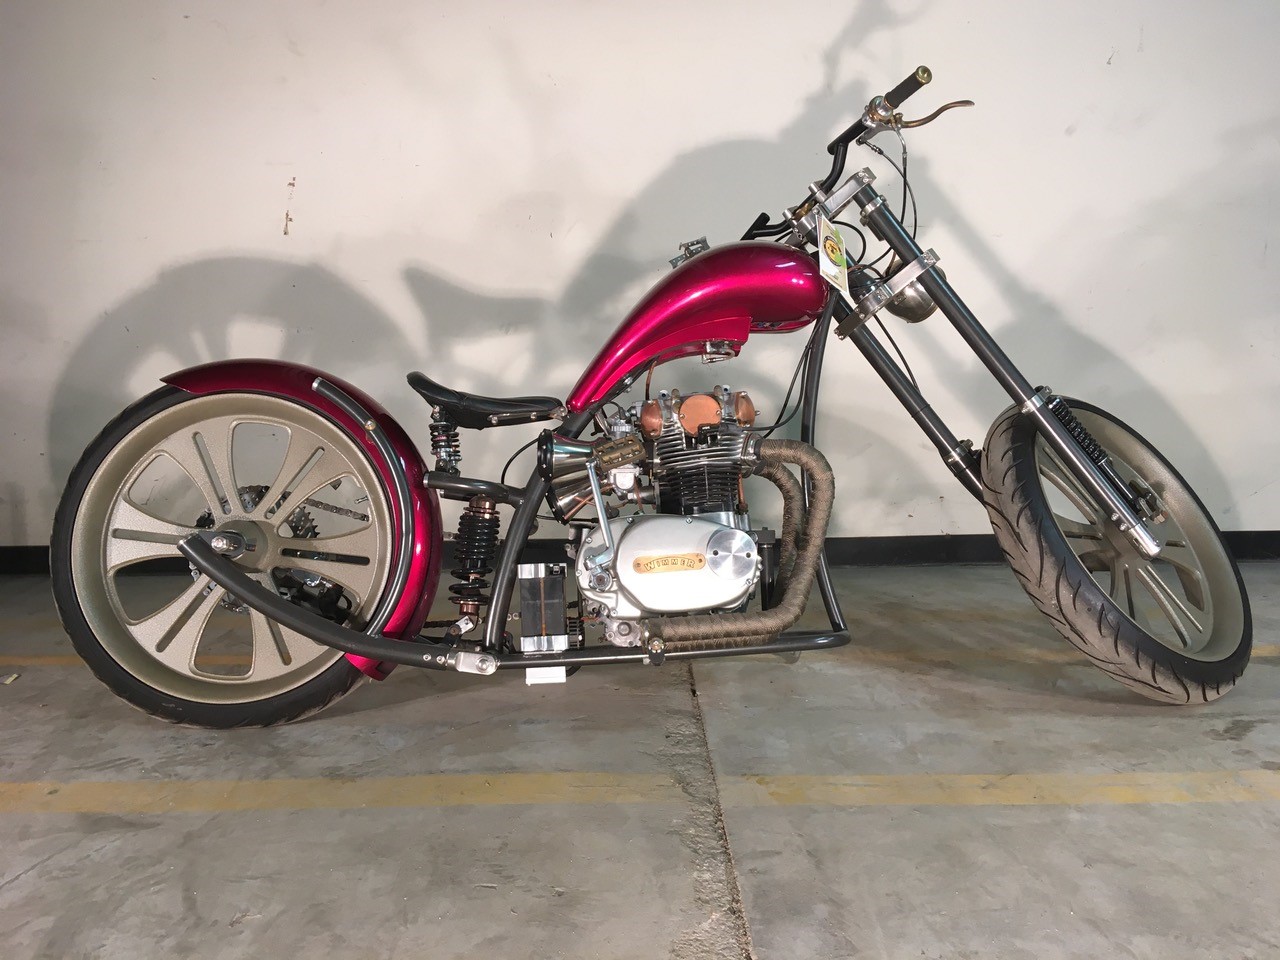 Vintage Motorcycle Auction & Open House! National Motorcycle Museum!  Call today to Consign!  - image 2